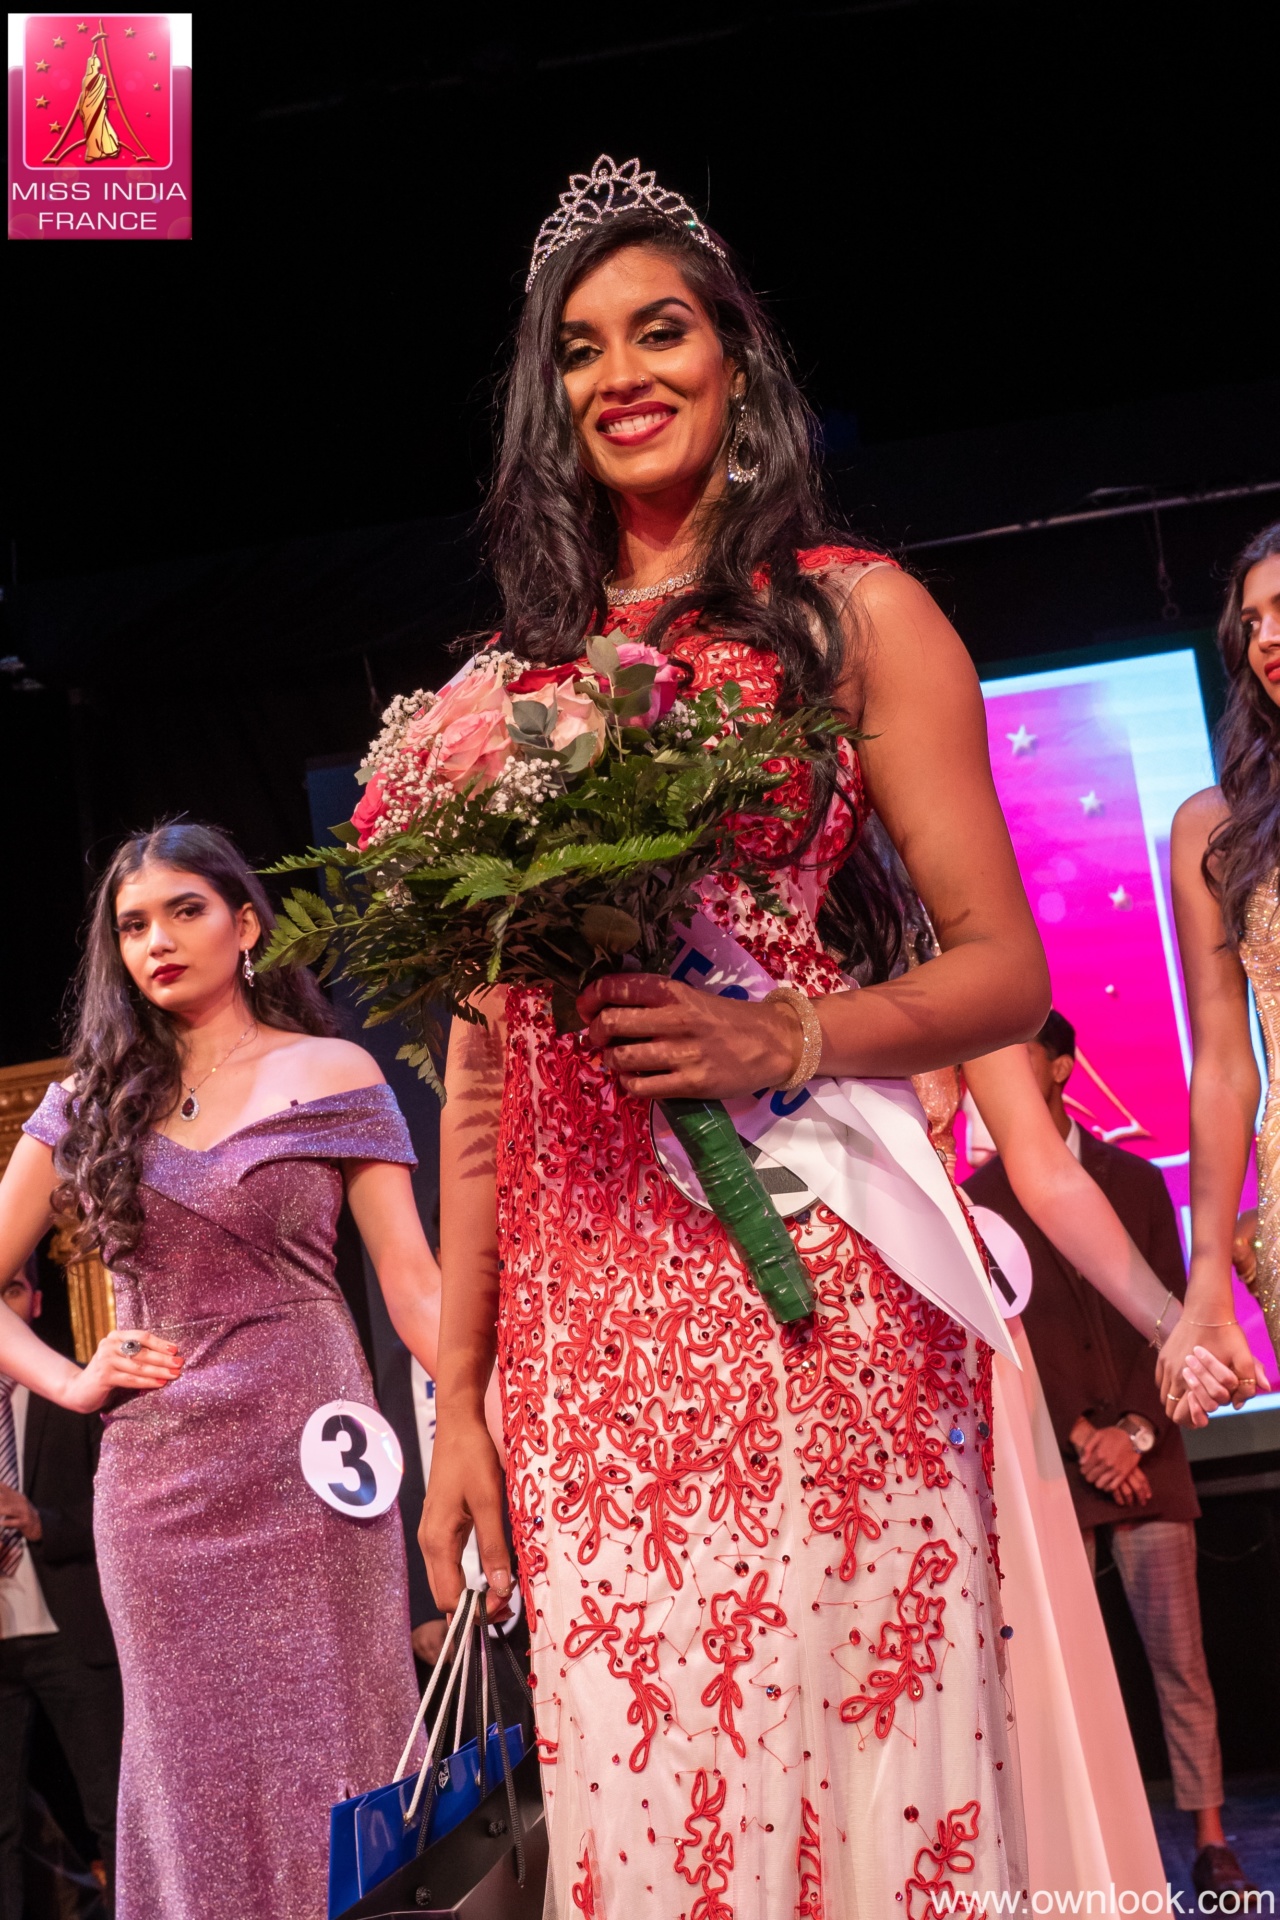 Miss India France 2020